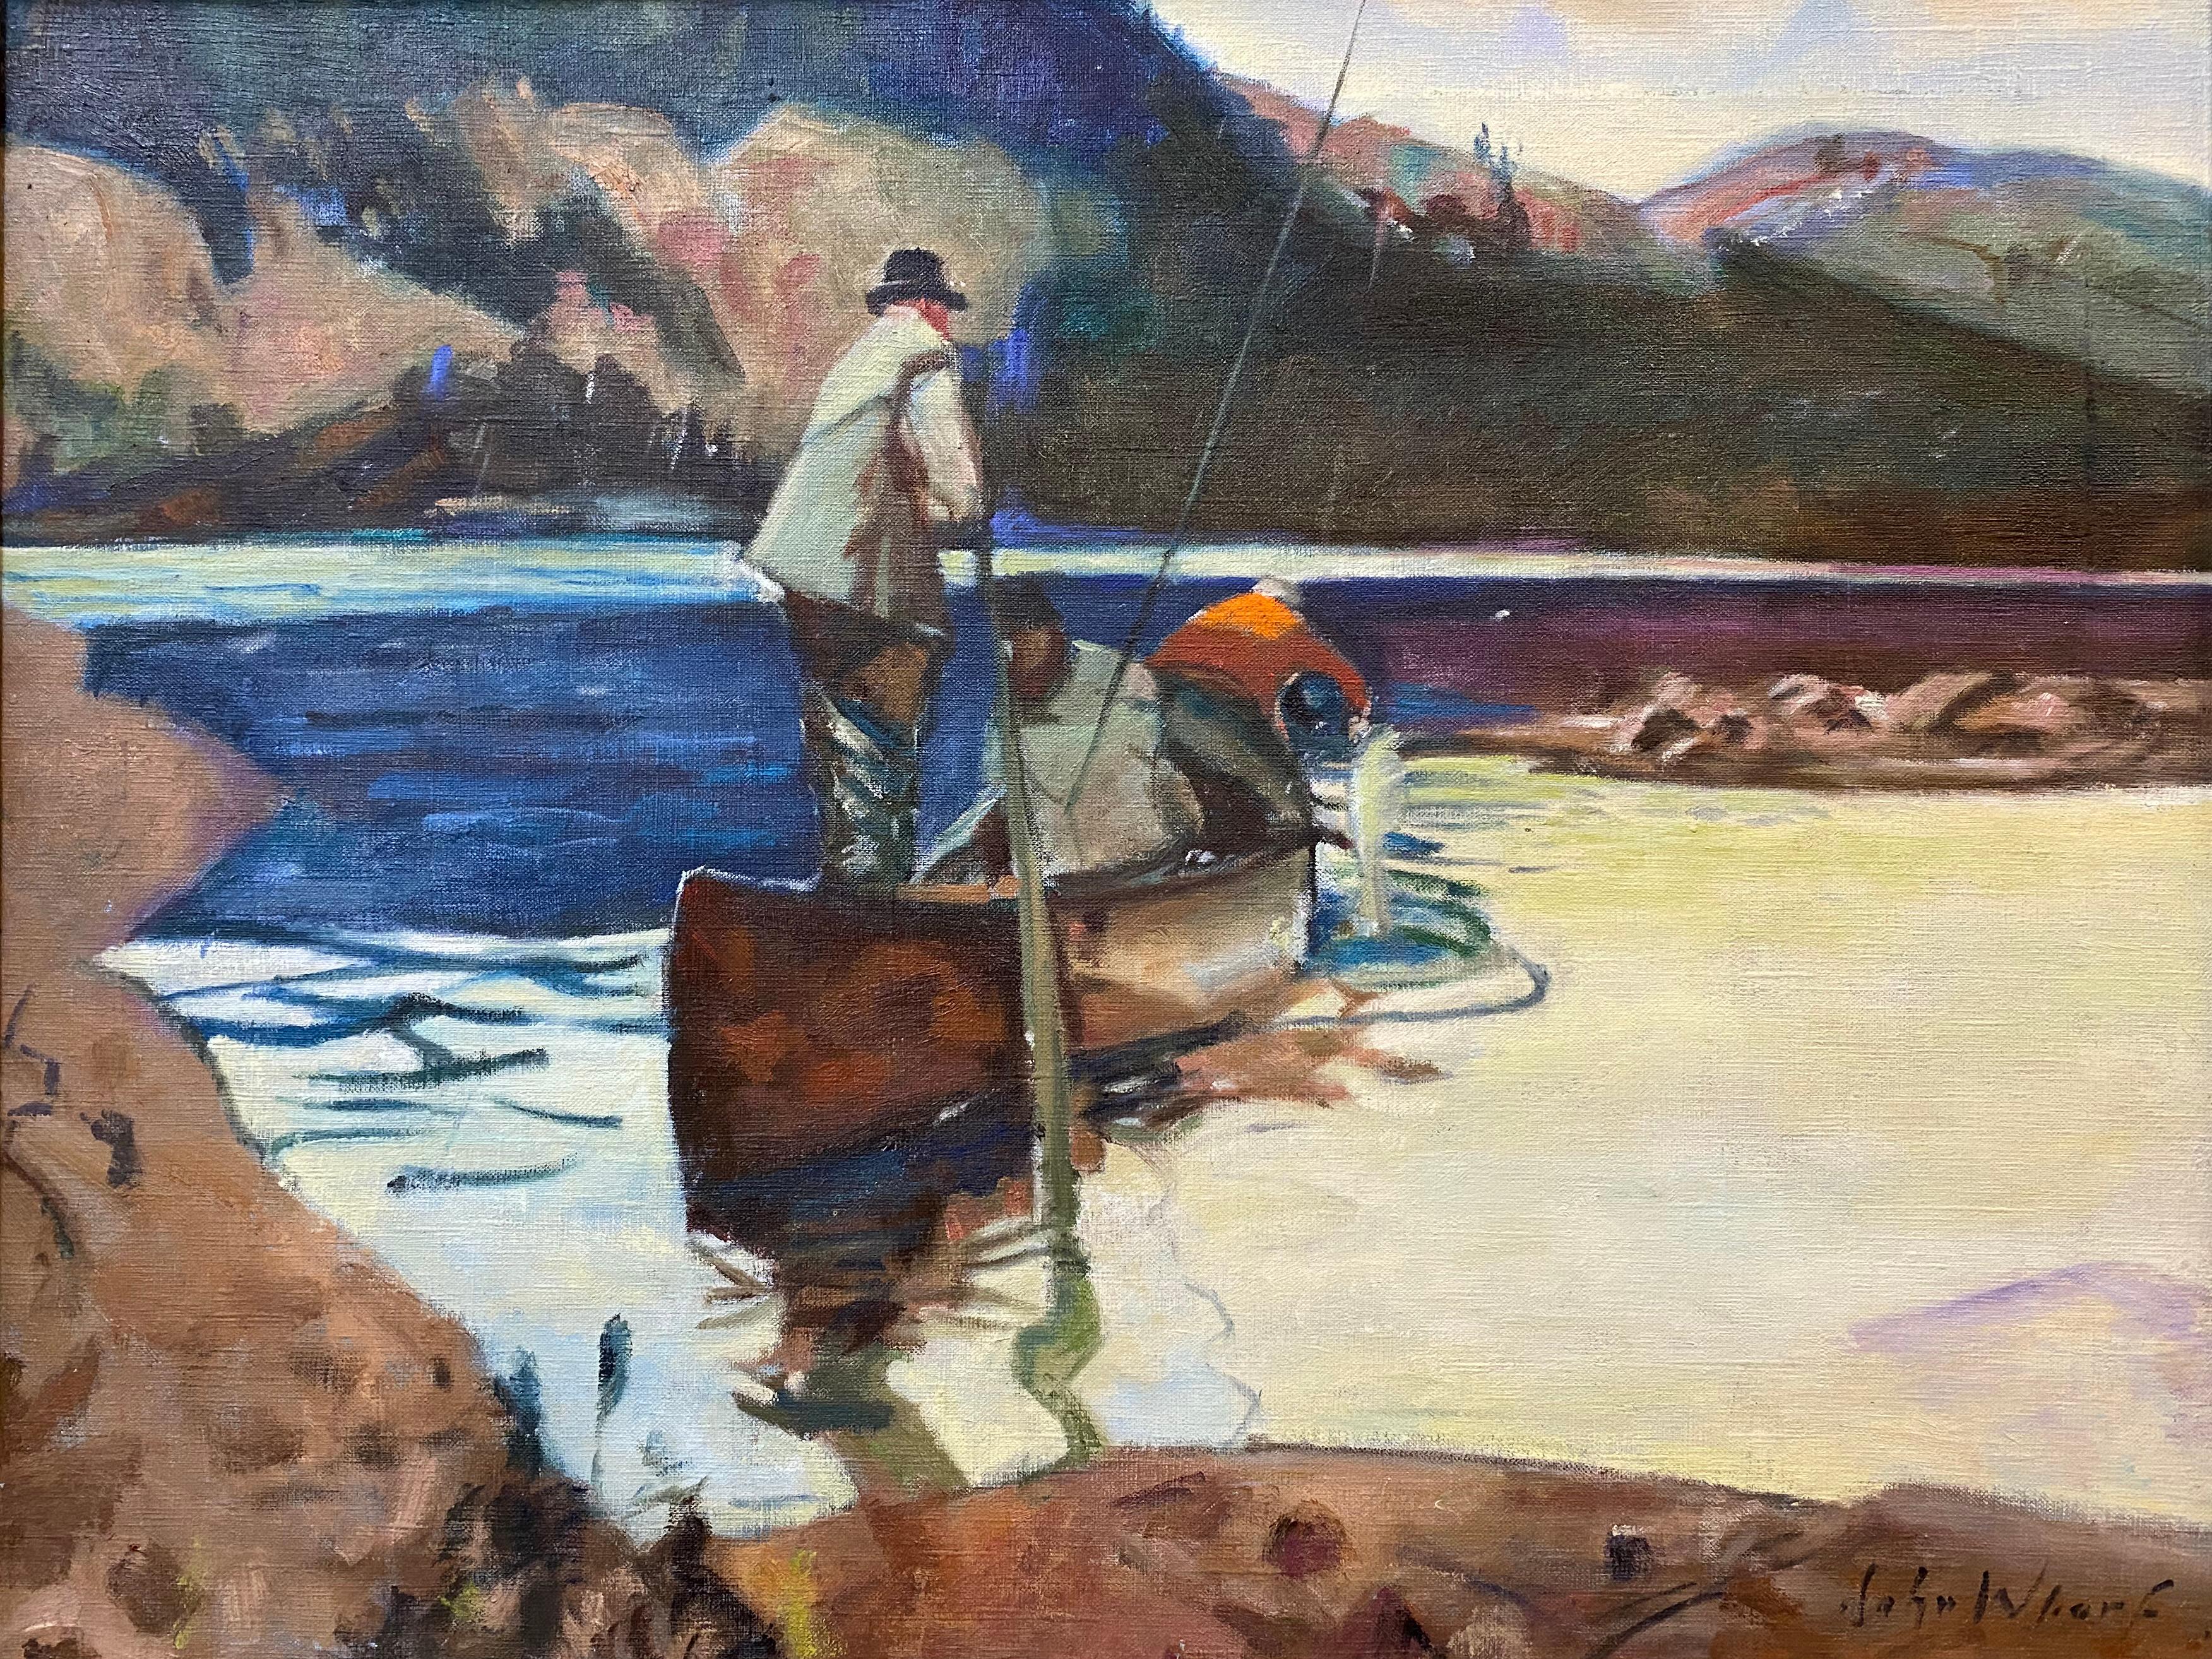 Salmon Fishing - Painting by John Whorf